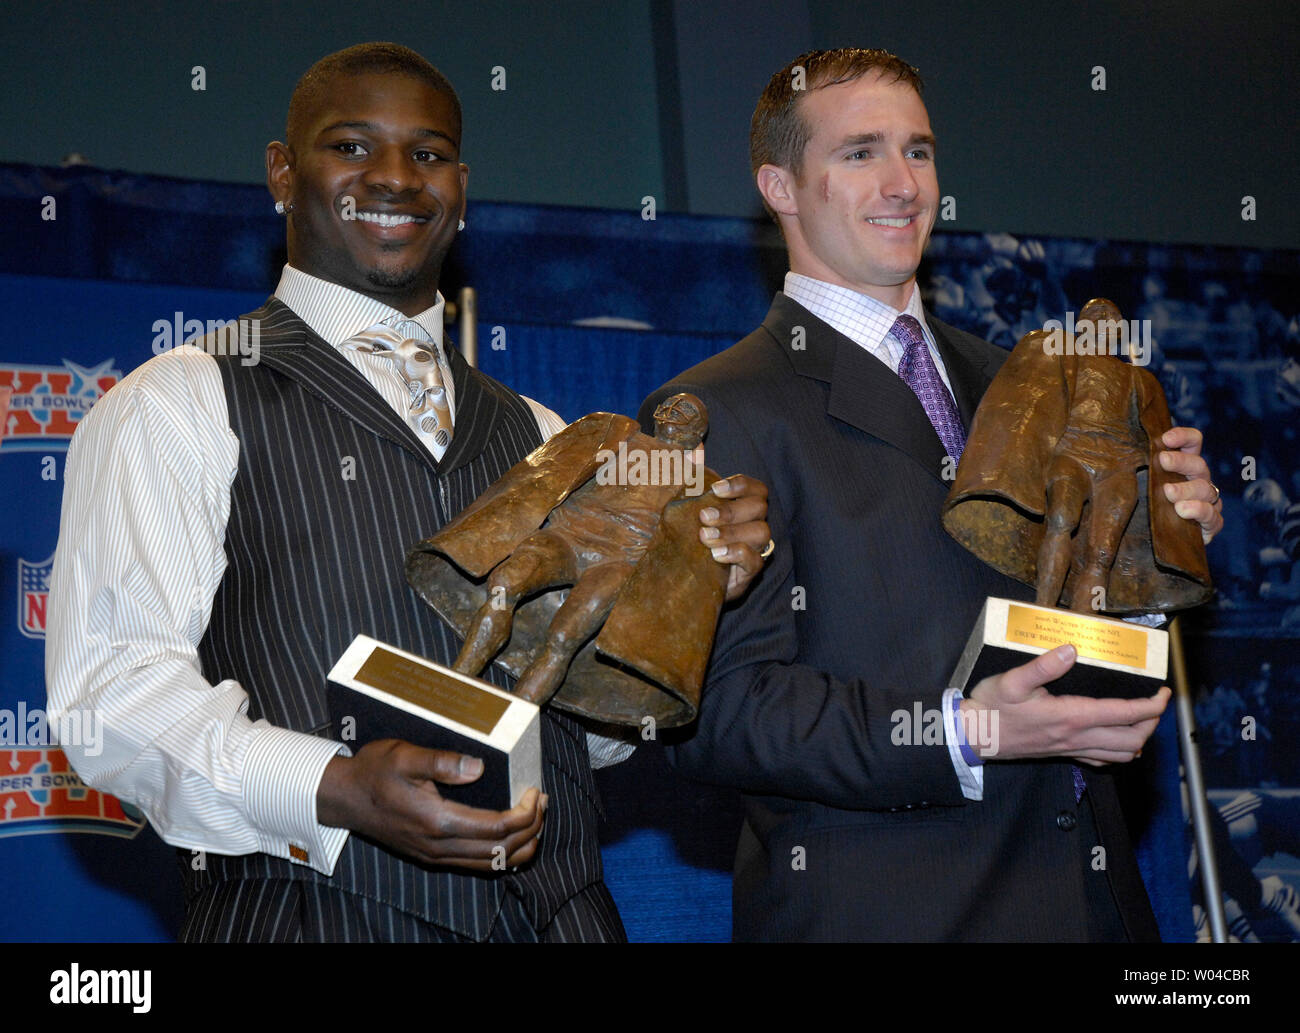 San Diego Chargers running back LaDainian Tomlinson (L) and New Orleans Saints quarter back Drew Brees pose with their Walter Peyton Man of the Year awards during the week of Super Bowl XLI in South Beach, Florida, on February 1, 2007.    (UPI Photo/Marino-Cantrell) Stock Photo